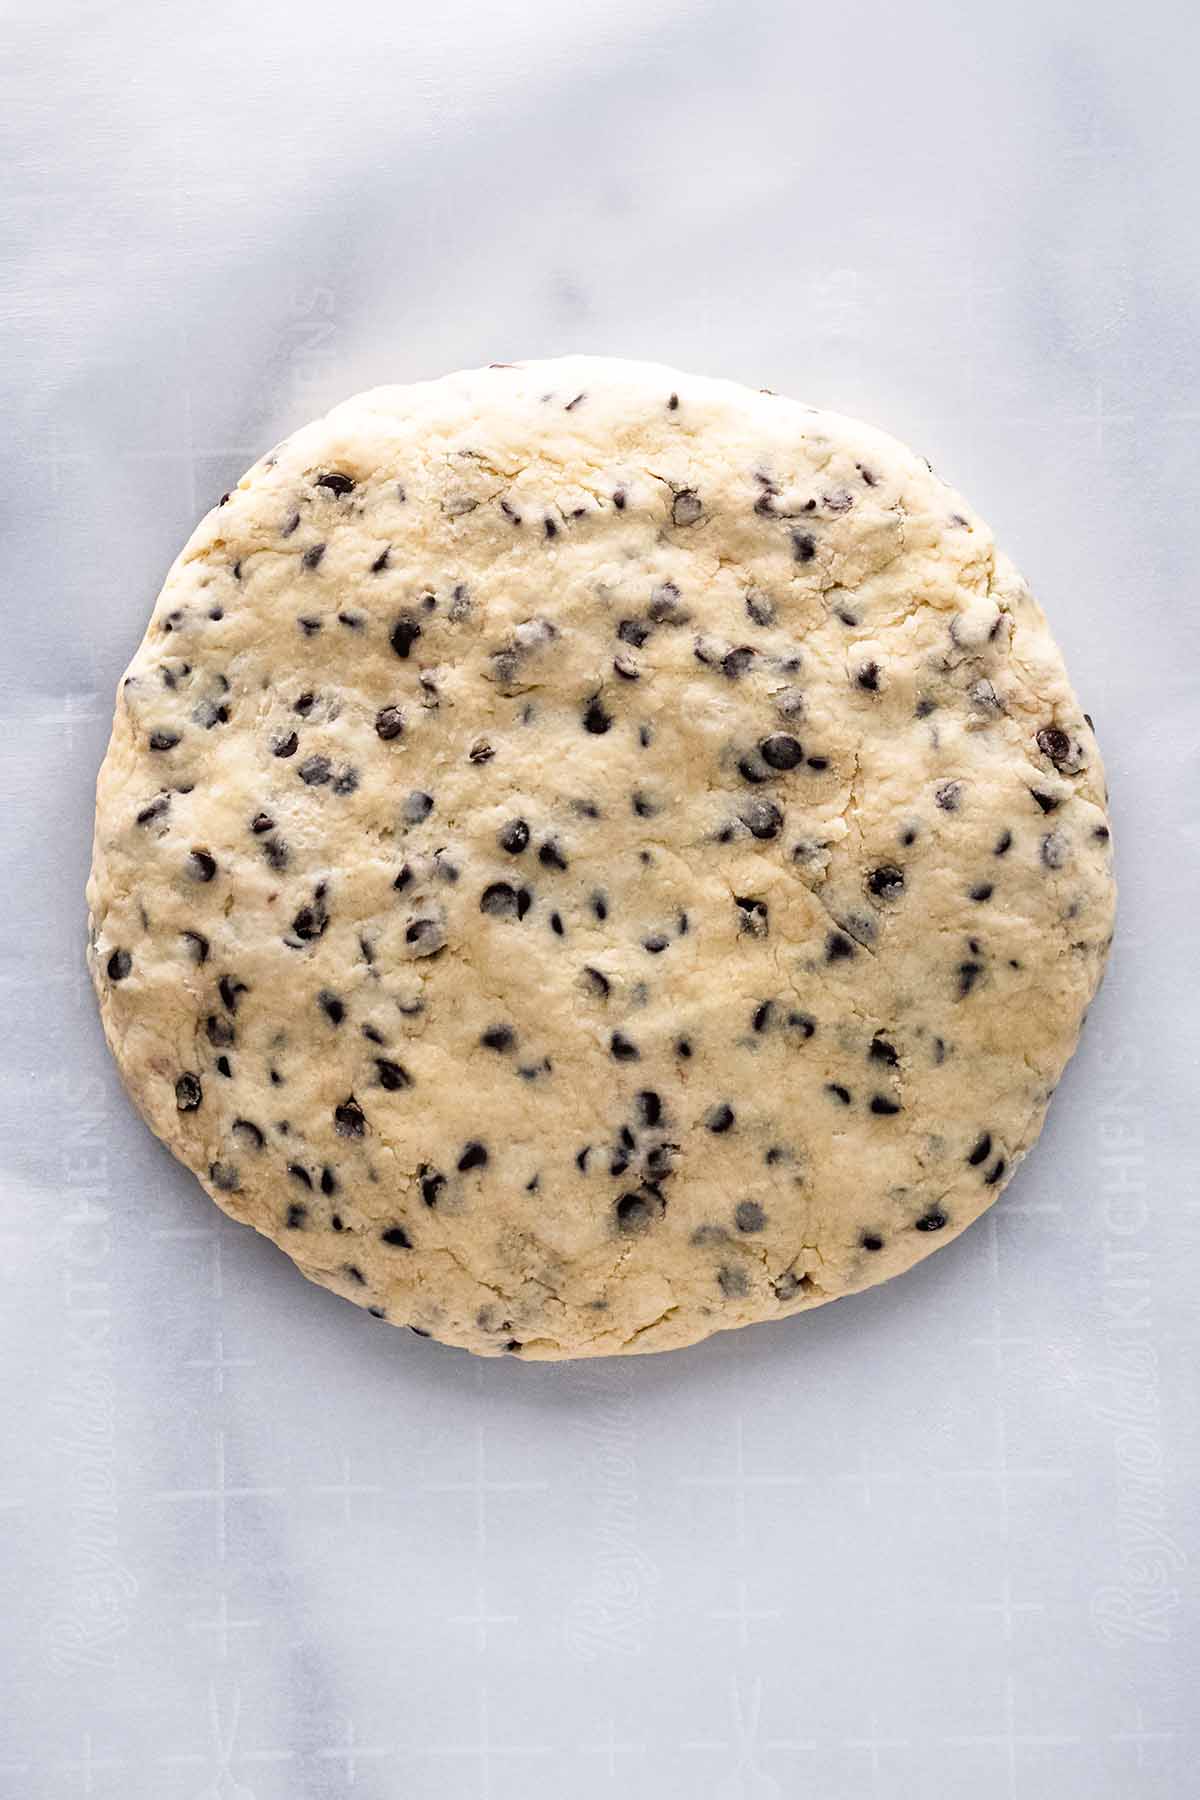 Overhead view of scone dough shaped into a disc